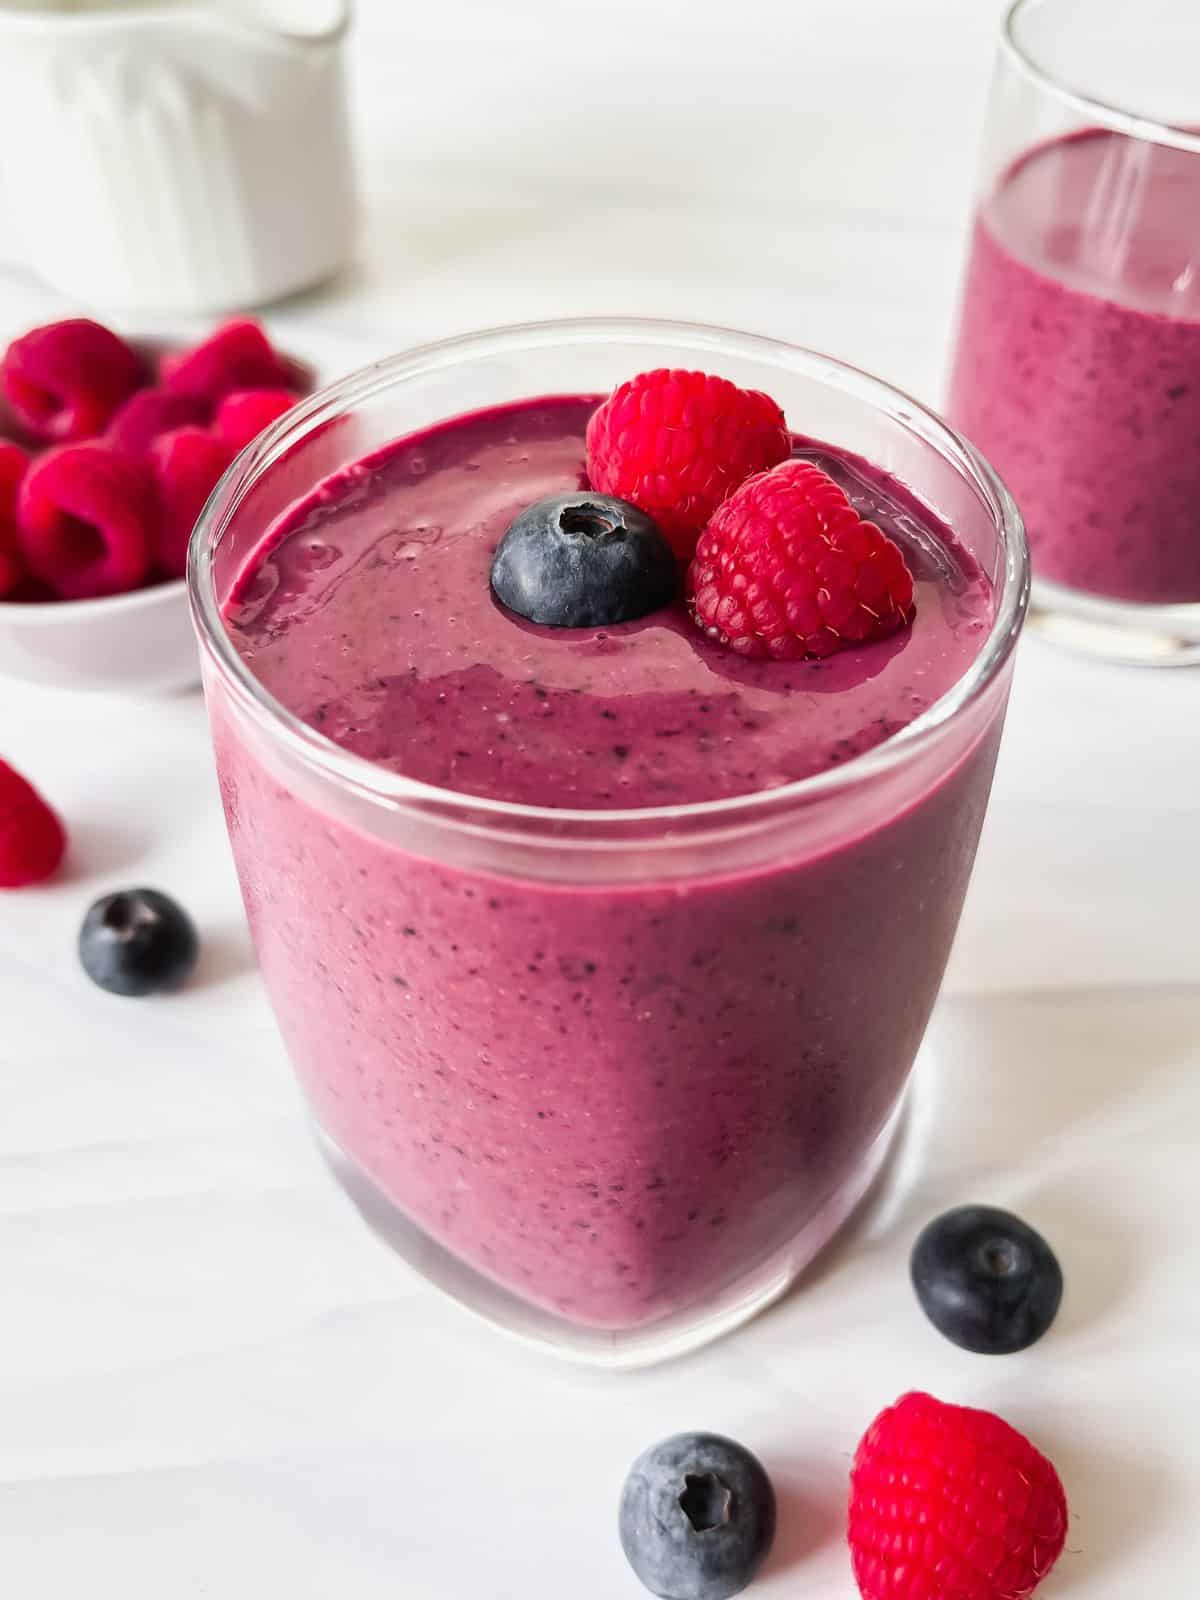 blueberry and raspberry smoothie in two glasses next to fresh fruits with a white jug in the background.